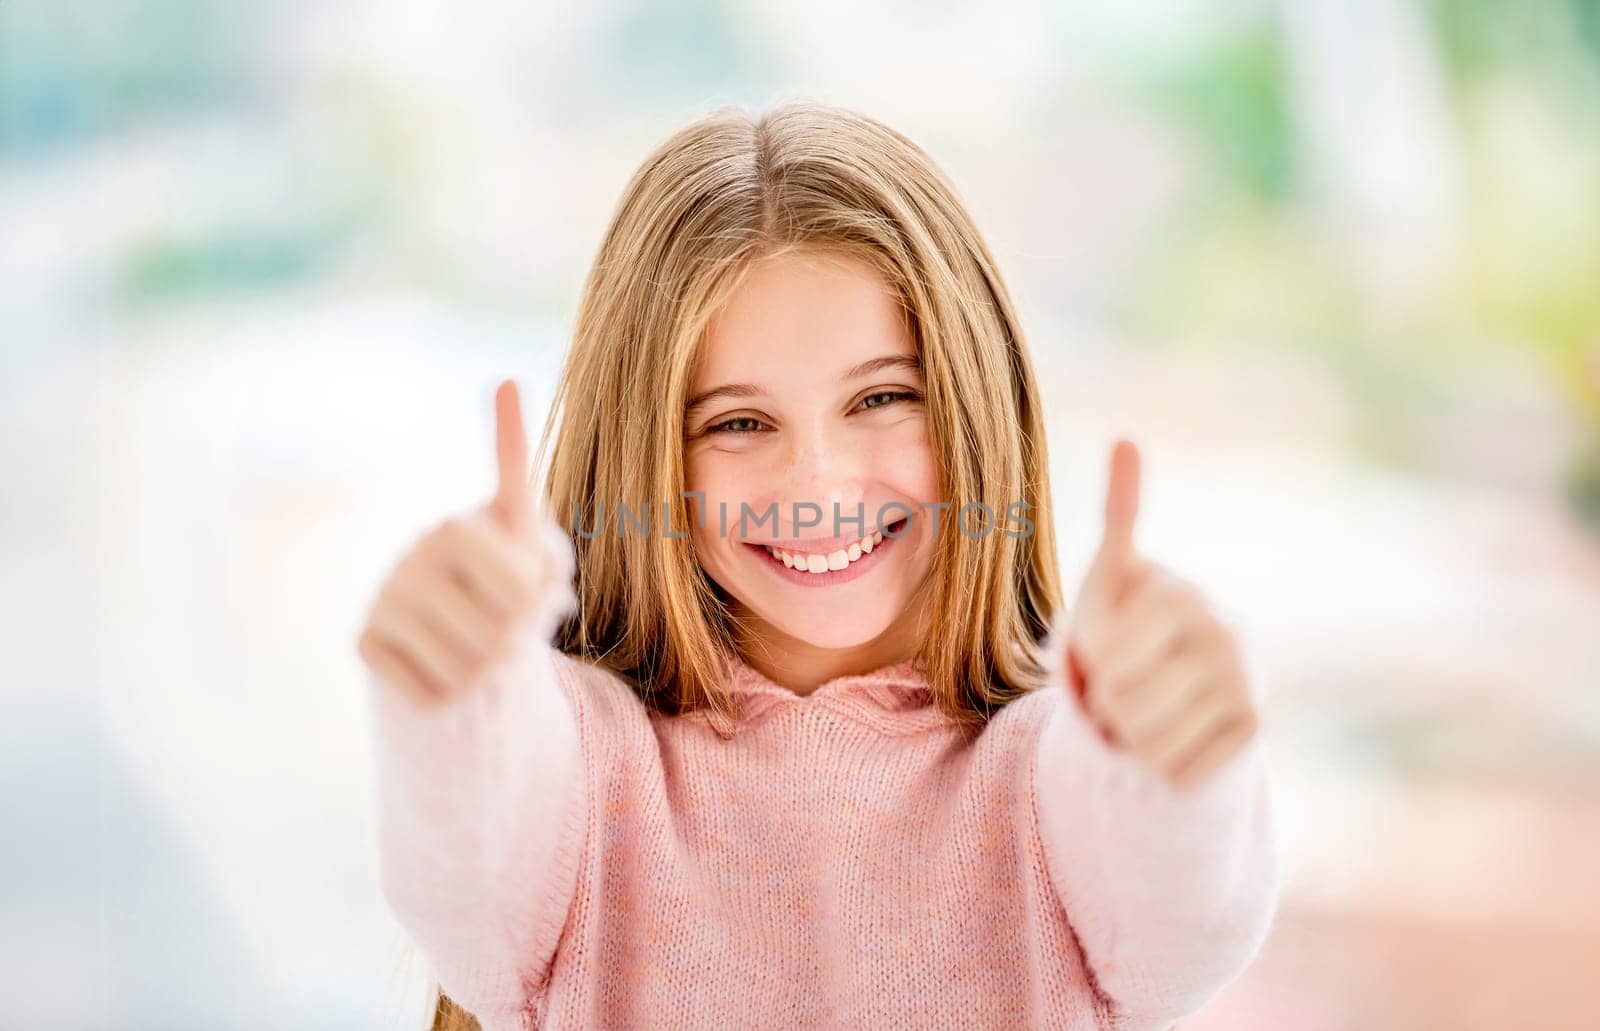 Cute little girl showing sign super with both thumbs